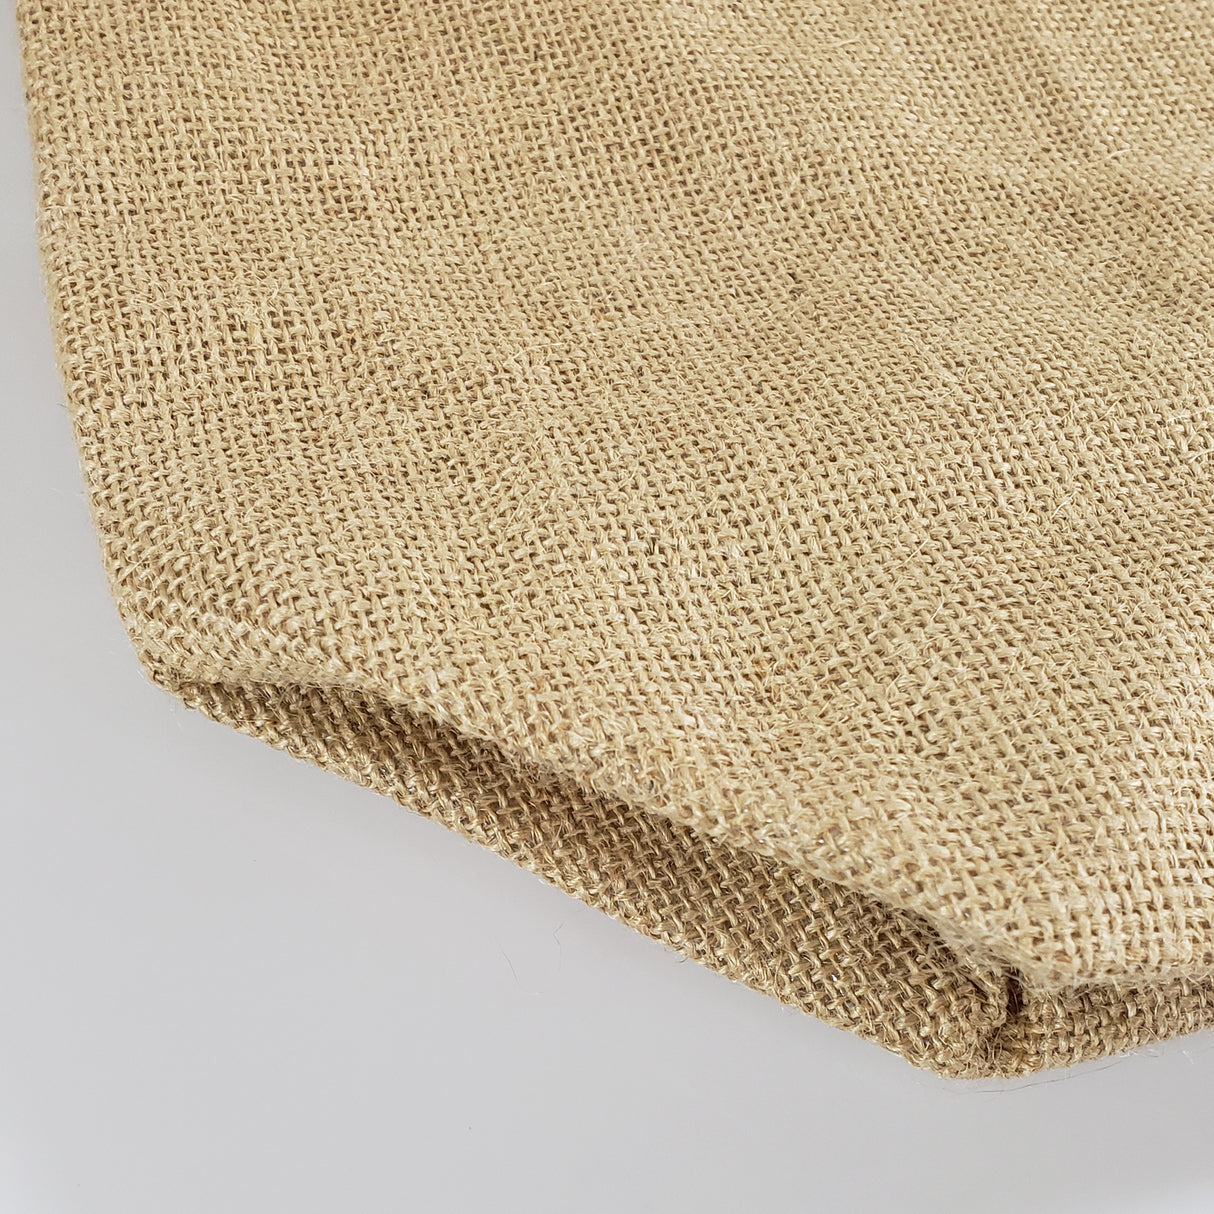 6 ct Everyday Jute Bags / Carry-All Burlap Totes - Pack of 6